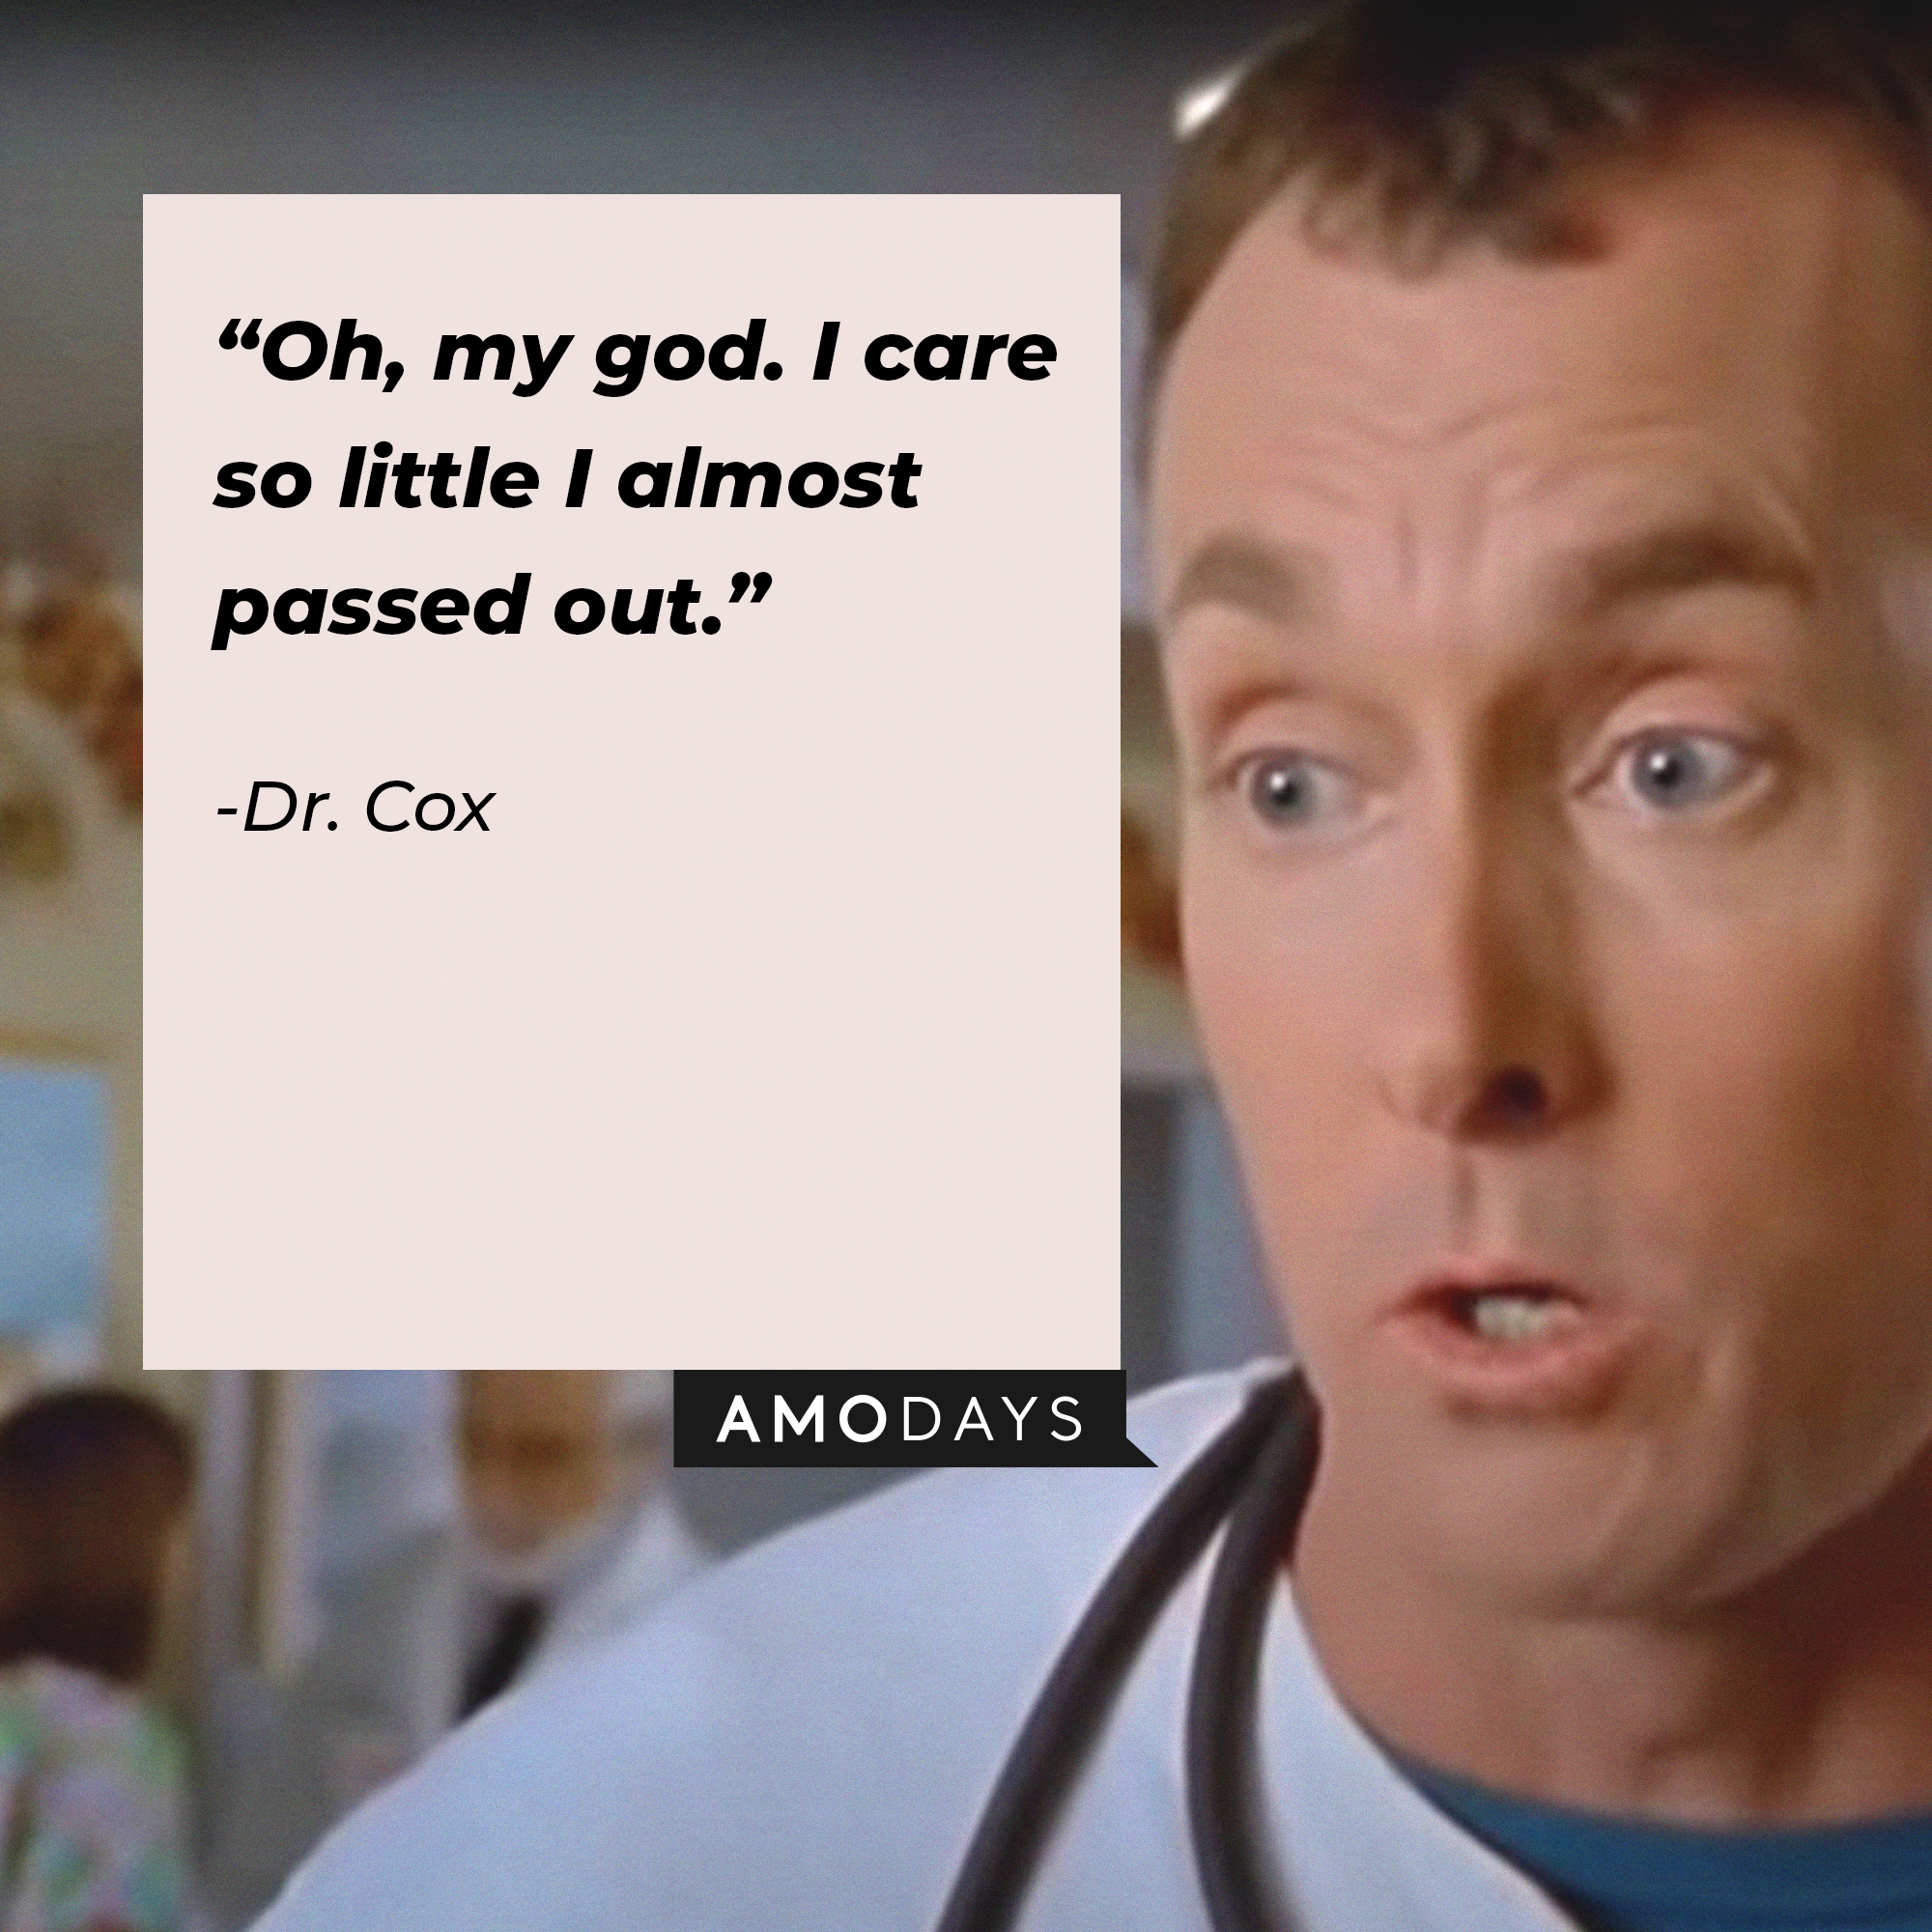 Dr. Cox, with his quote: “Oh, my god. I care so little I almost passed out.” | Source: facebook.com/scrubs